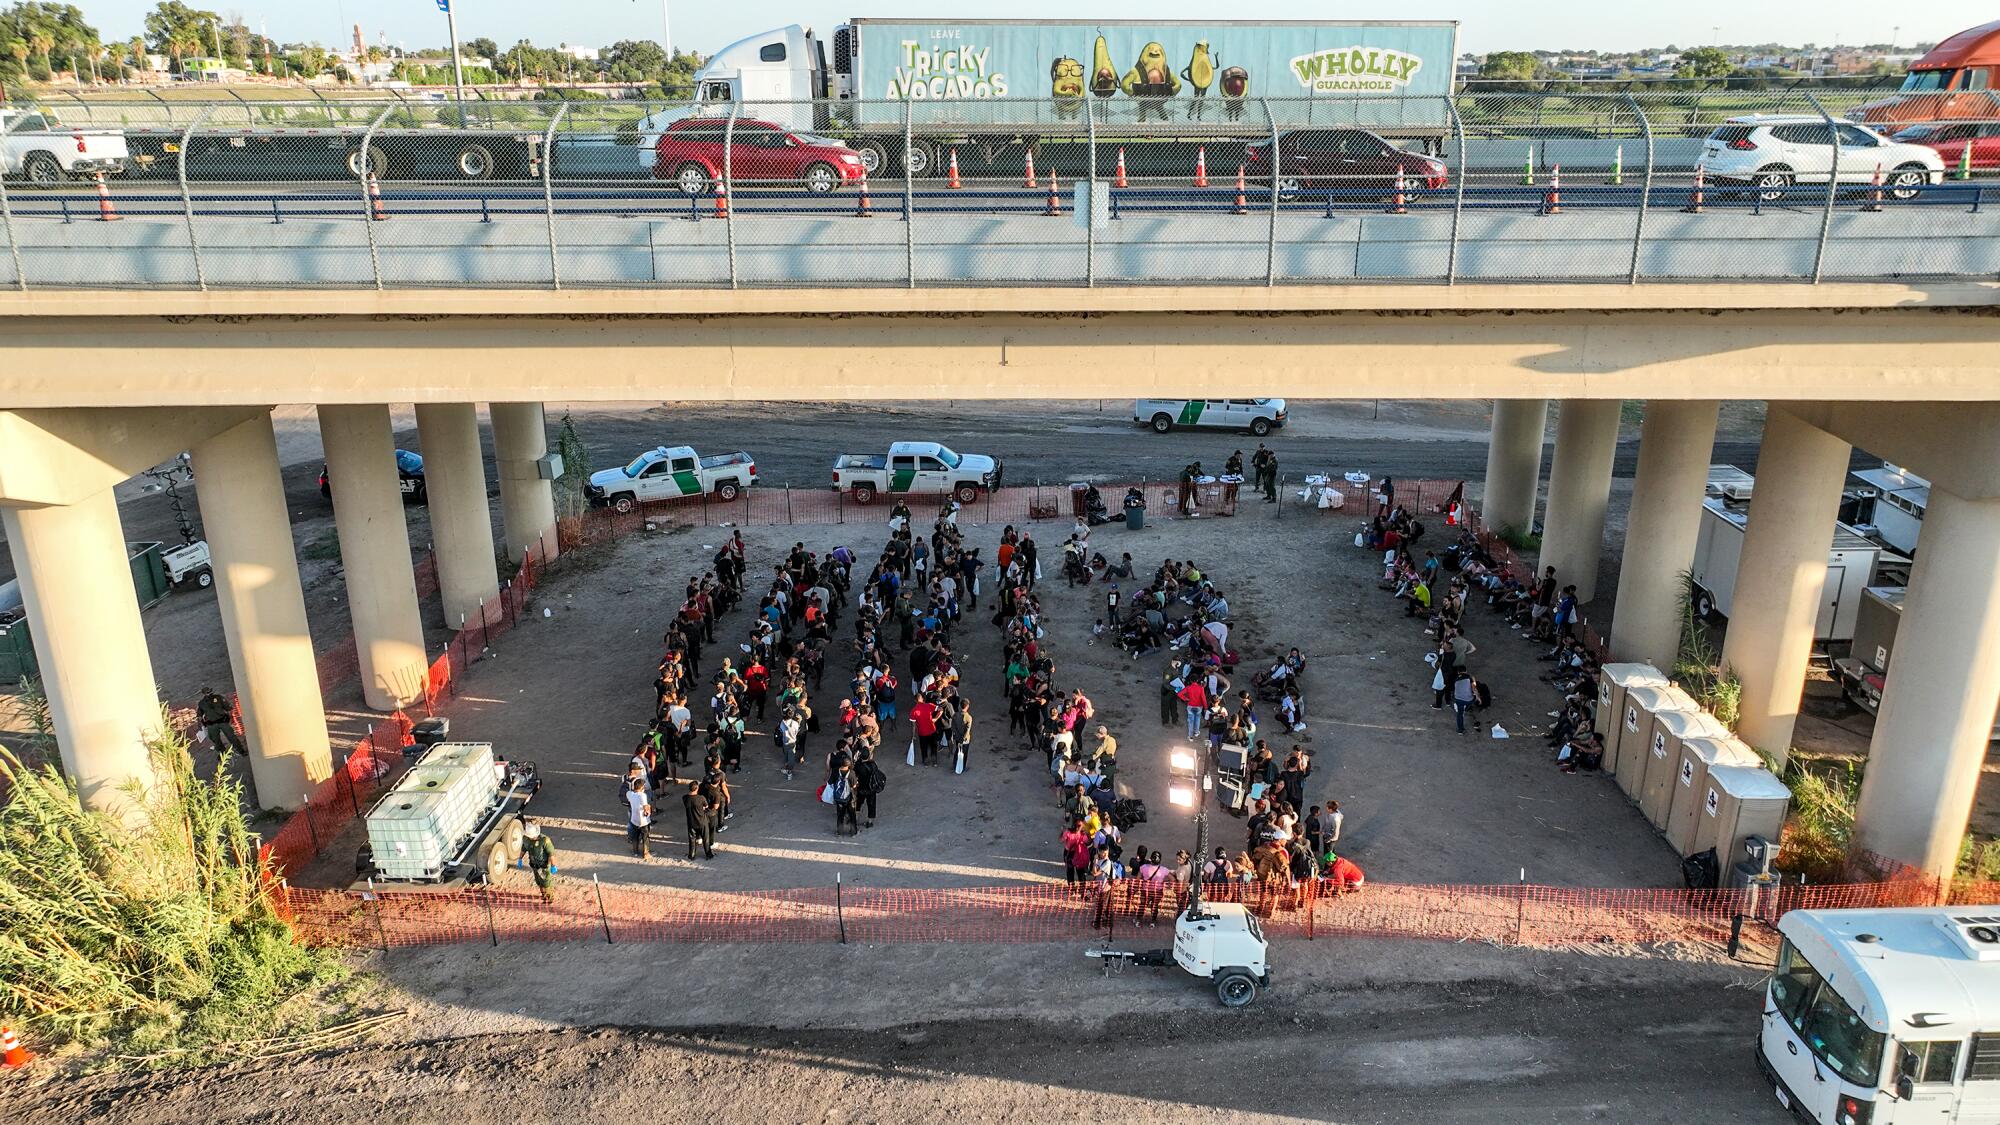 People who crossed the U.S.-Mexico border are held in an area under a bridge with cars driving on it.